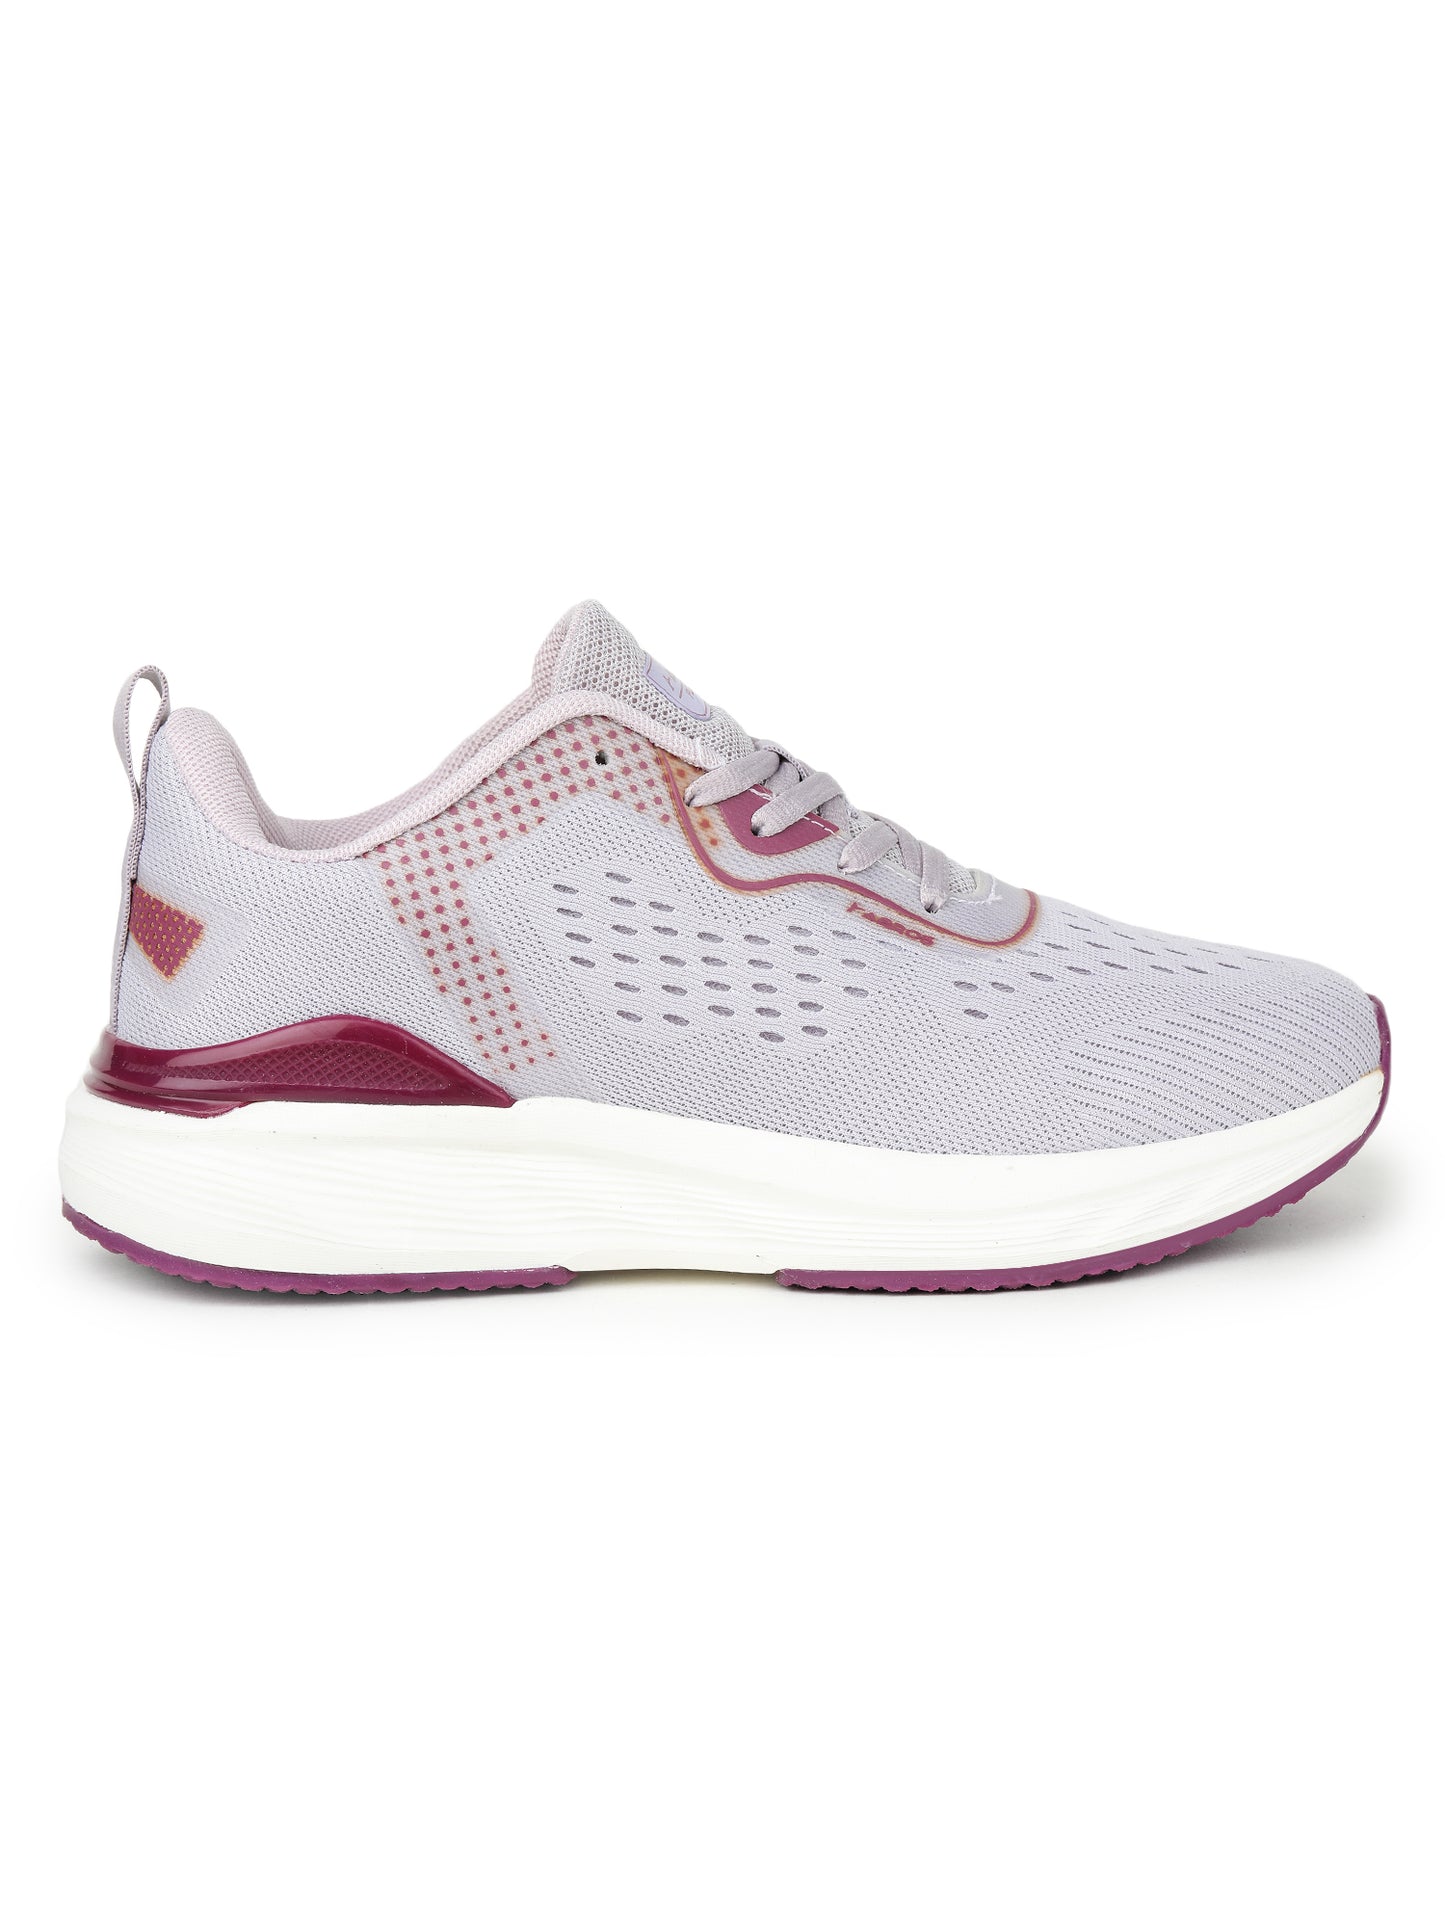 ABROS DALES SPORTS SHOES FOR WOMEN